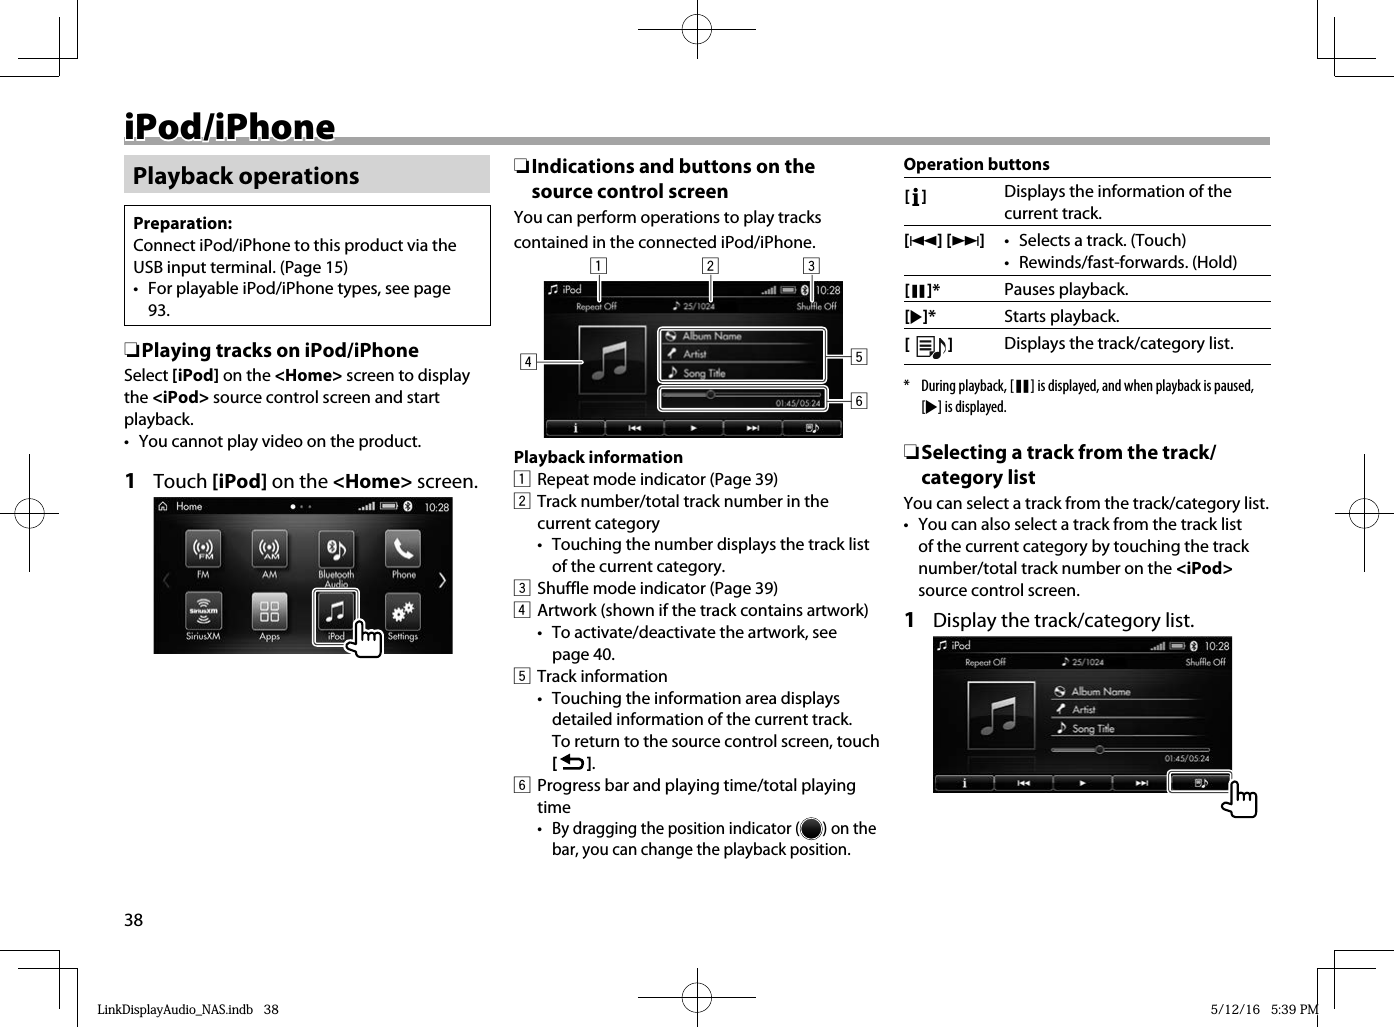 38 iPod/iPhone iPod/iPhonePlayback operationsPreparation:Connect iPod/iPhone to this product via the USB input terminal. (Page 15)•  For playable iPod/iPhone types, see page 93. ❏ Playing tracks on iPod/iPhoneSelect [iPod] on the &lt;Home&gt; screen to display the &lt;iPod&gt; source control screen and start playback.•  You cannot play video on the product.1 Touch [iPod] on the &lt;Home&gt; screen. ❏ Indications and buttons on the source control screenYou can perform operations to play tracks contained in the connected iPod/iPhone.123456Playback information1  Repeat mode indicator (Page 39)2  Track number/total track number in the current category•   Touching the number displays the track list of the current category.3  Shuffle mode indicator (Page 39)4  Artwork (shown if the track contains artwork)•  To activate/deactivate the artwork, see page 40.5 Track information•  Touching the information area displays detailed information of the current track. To return to the source control screen, touch [   ].6  Progress bar and playing time/total playing time•  By dragging the position indicator ( ) on the bar, you can change the playback position.Operation buttons[   ] Displays the information of the current track.[S] [T]•  Selects a track. (Touch)• Rewinds/fast-forwards. (Hold) [W]* Pauses playback.[I]* Starts playback.[  ]Displays the track/category list.*  During playback, [W] is displayed, and when playback is paused, [I] is displayed.  ❏ Selecting a track from the track/category listYou can select a track from the track/category list.•  You can also select a track from the track list of the current category by touching the track number/total track number on the &lt;iPod&gt; source control screen.1  Display the track/category list.LinkDisplayAudio_NAS.indb   38LinkDisplayAudio_NAS.indb   38 5/12/16   5:39 PM5/12/16   5:39 PM